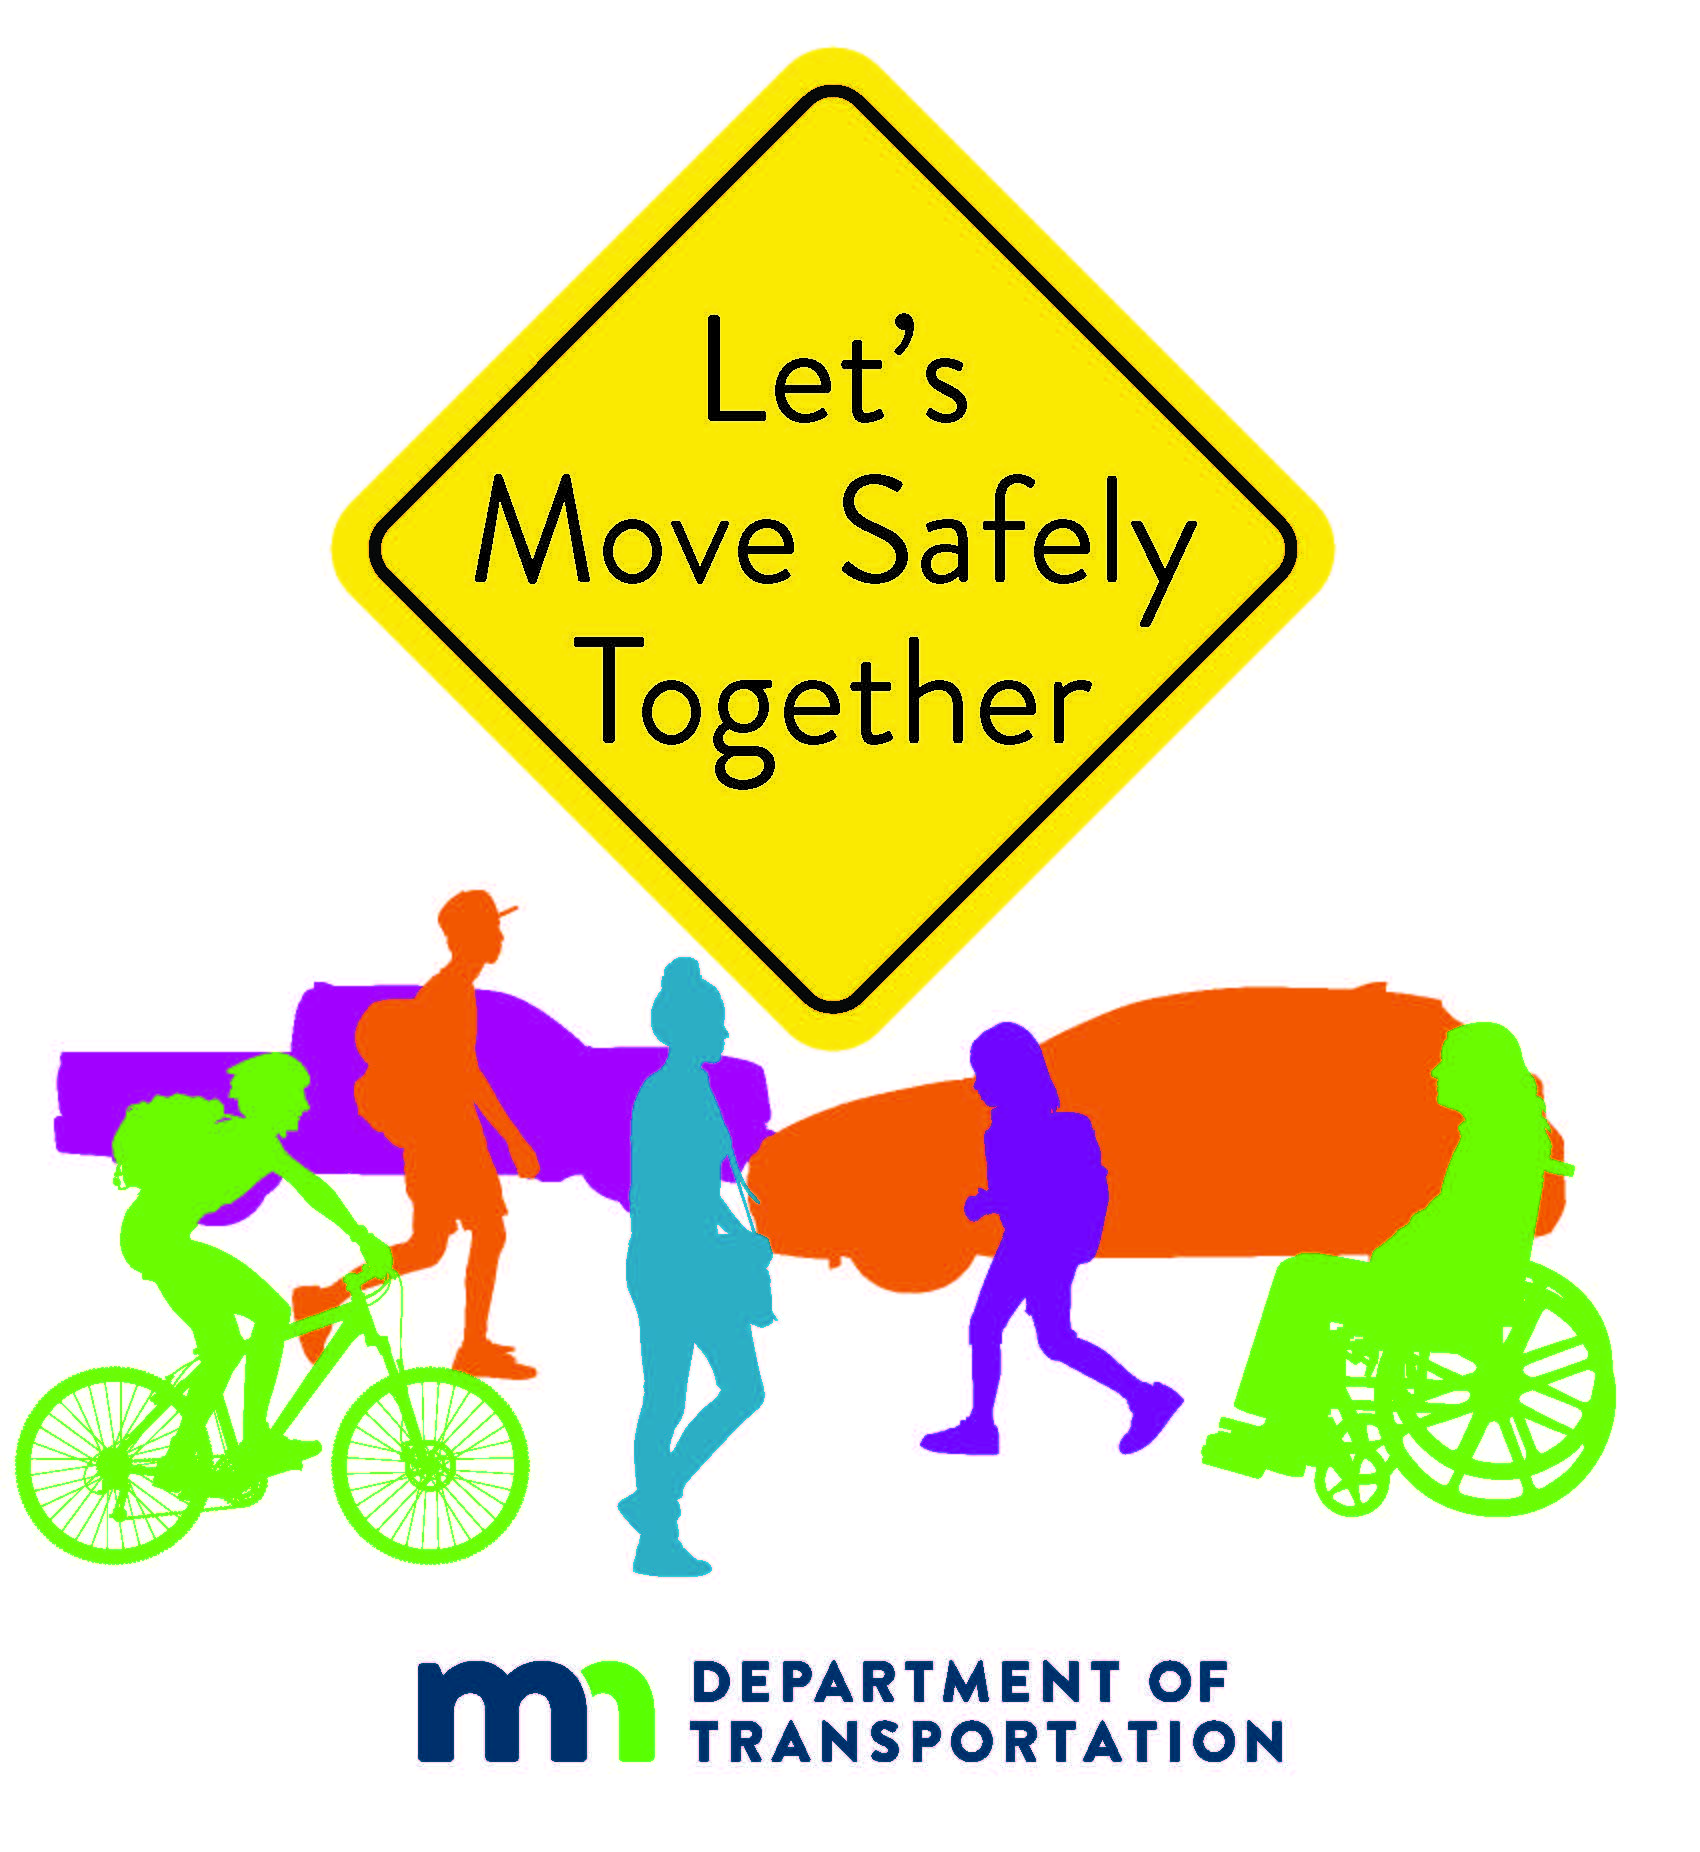 Silhouette of a variety of people and vehicles in front of a road sign that says Let's Move Safely Together